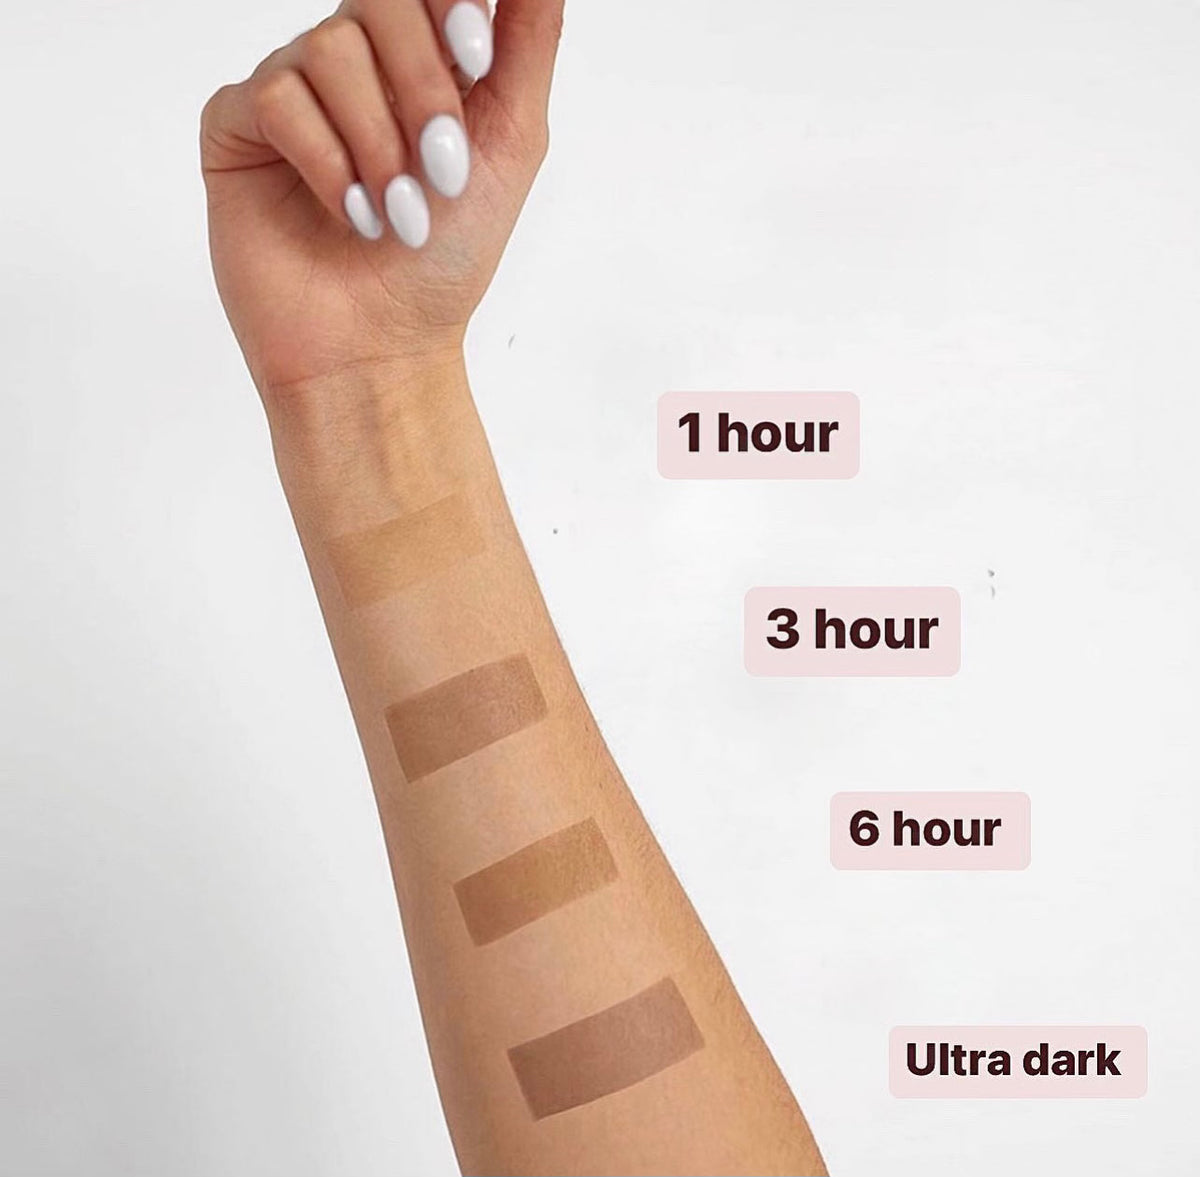 Color guide showing Malibu Bronze tan foam effect at the 1 hour, 3 hour, 6 hour mark.